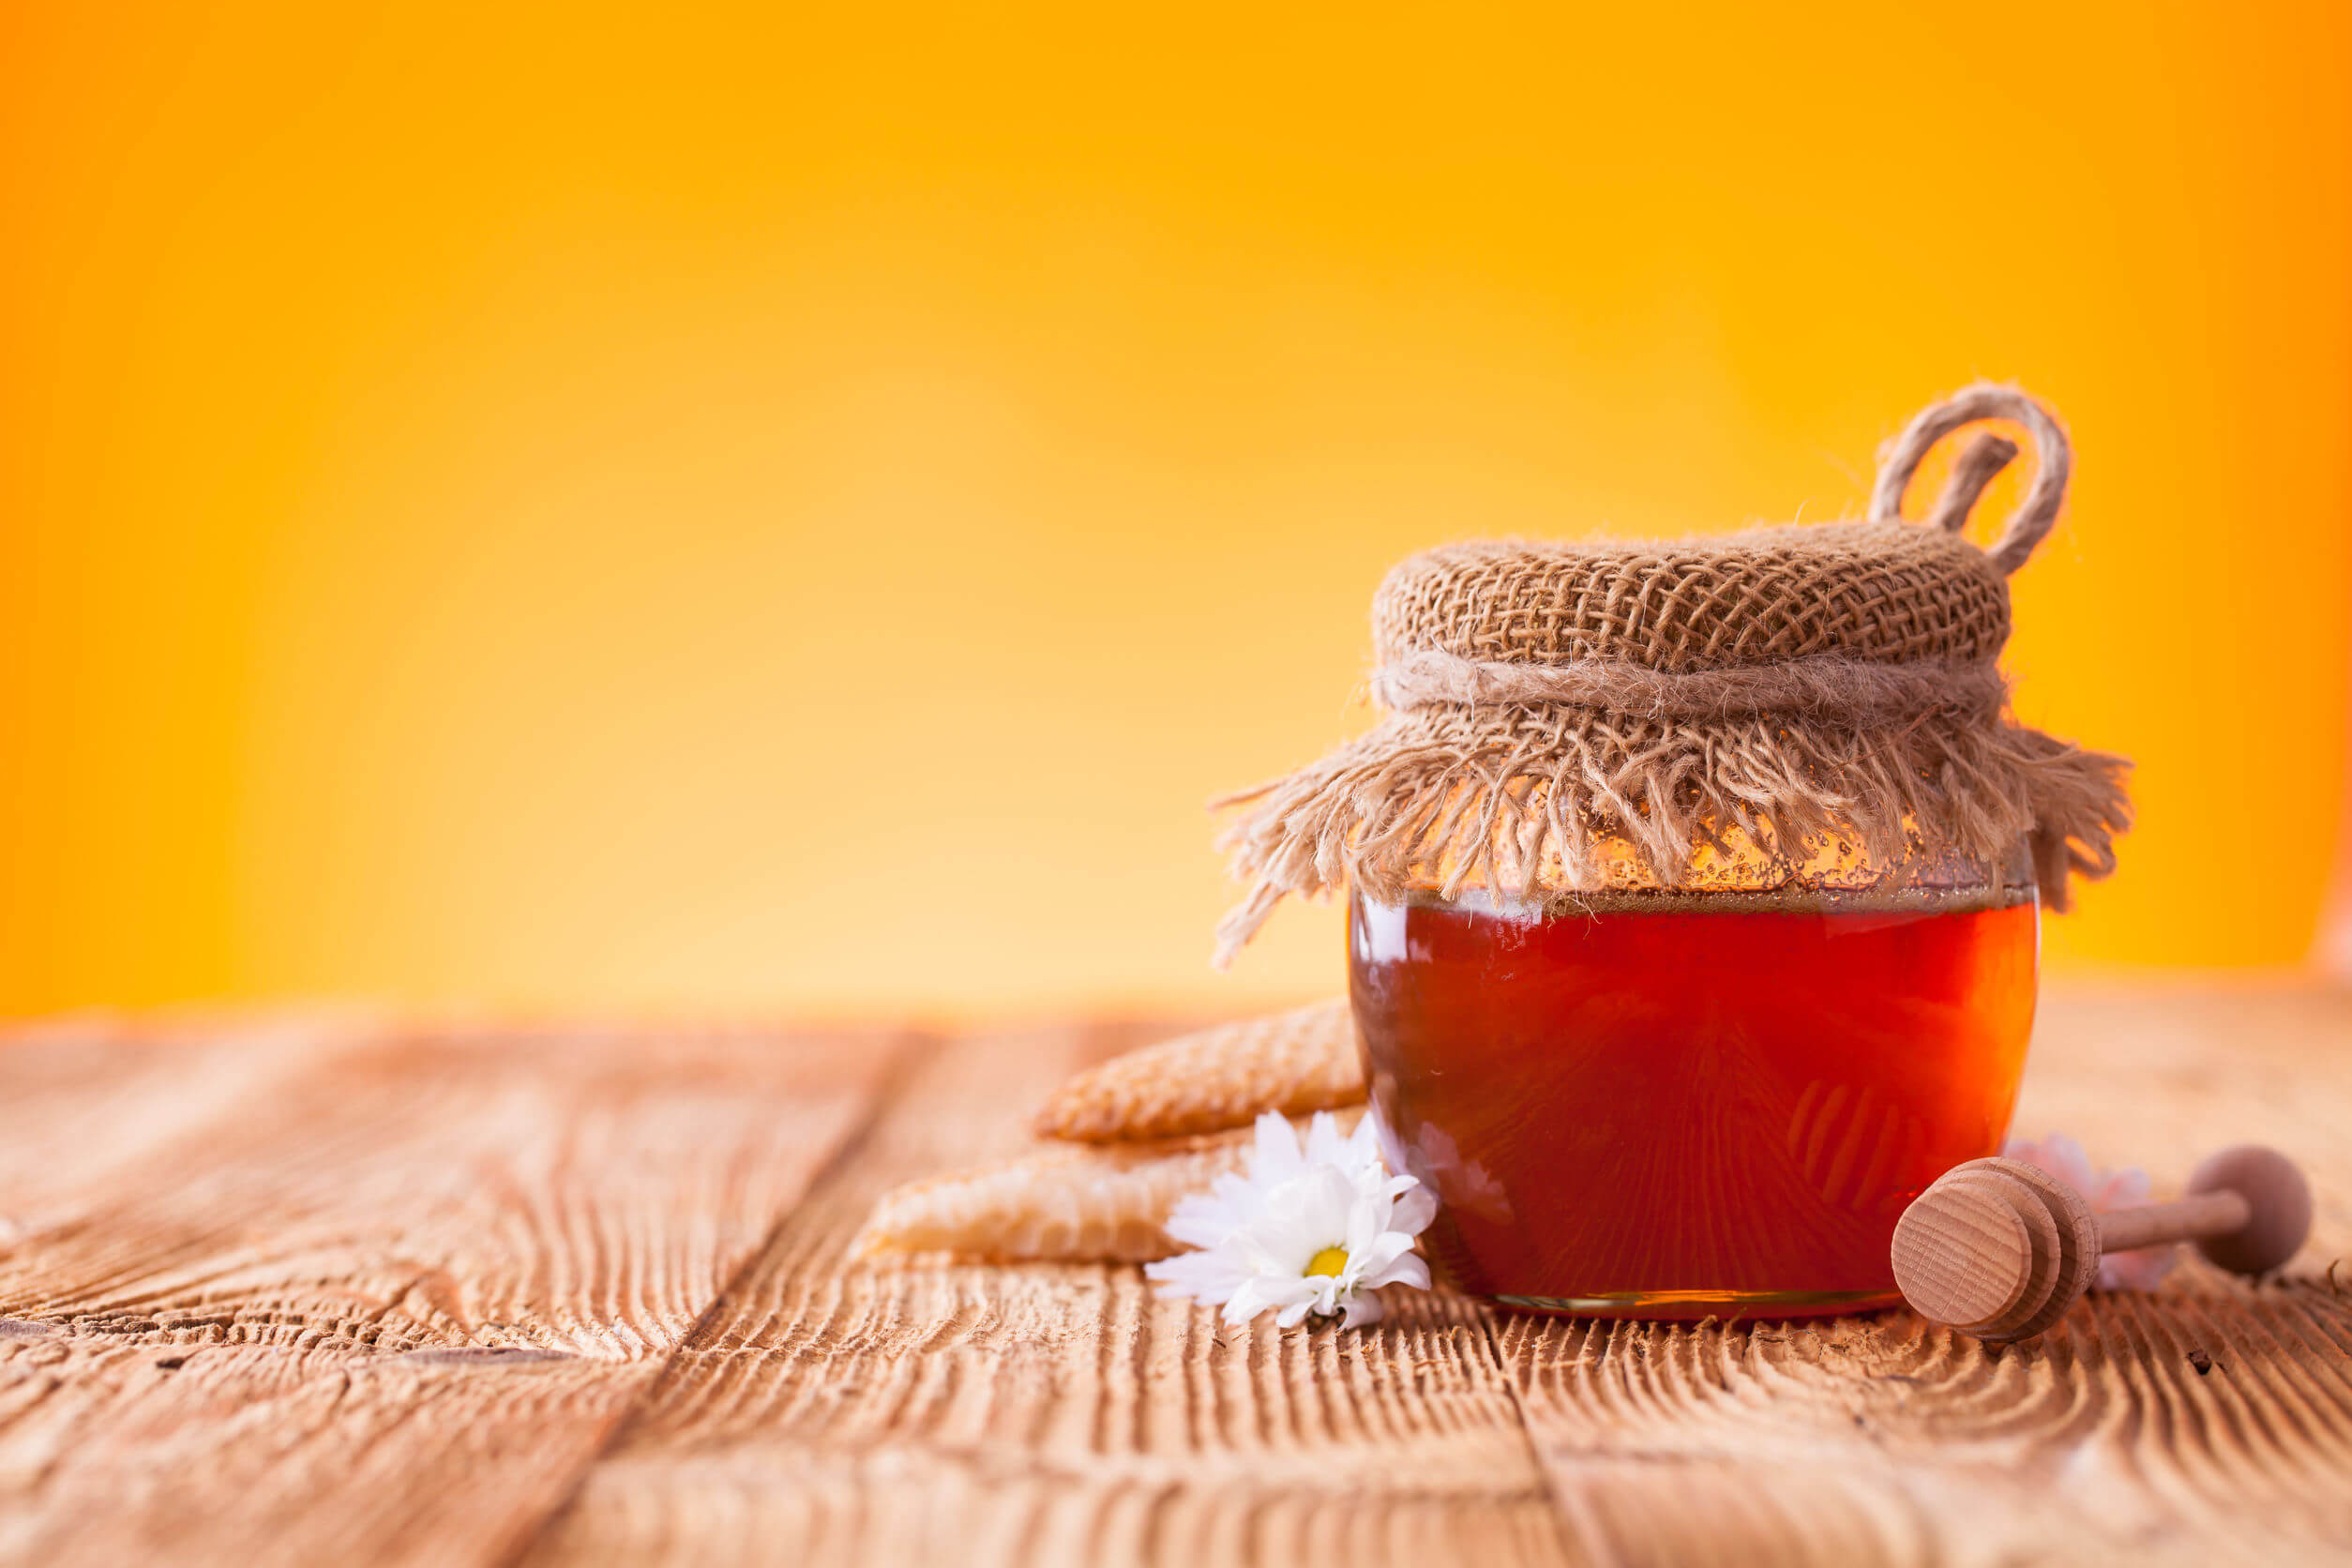 Botulism can appear from the consumption of honey.